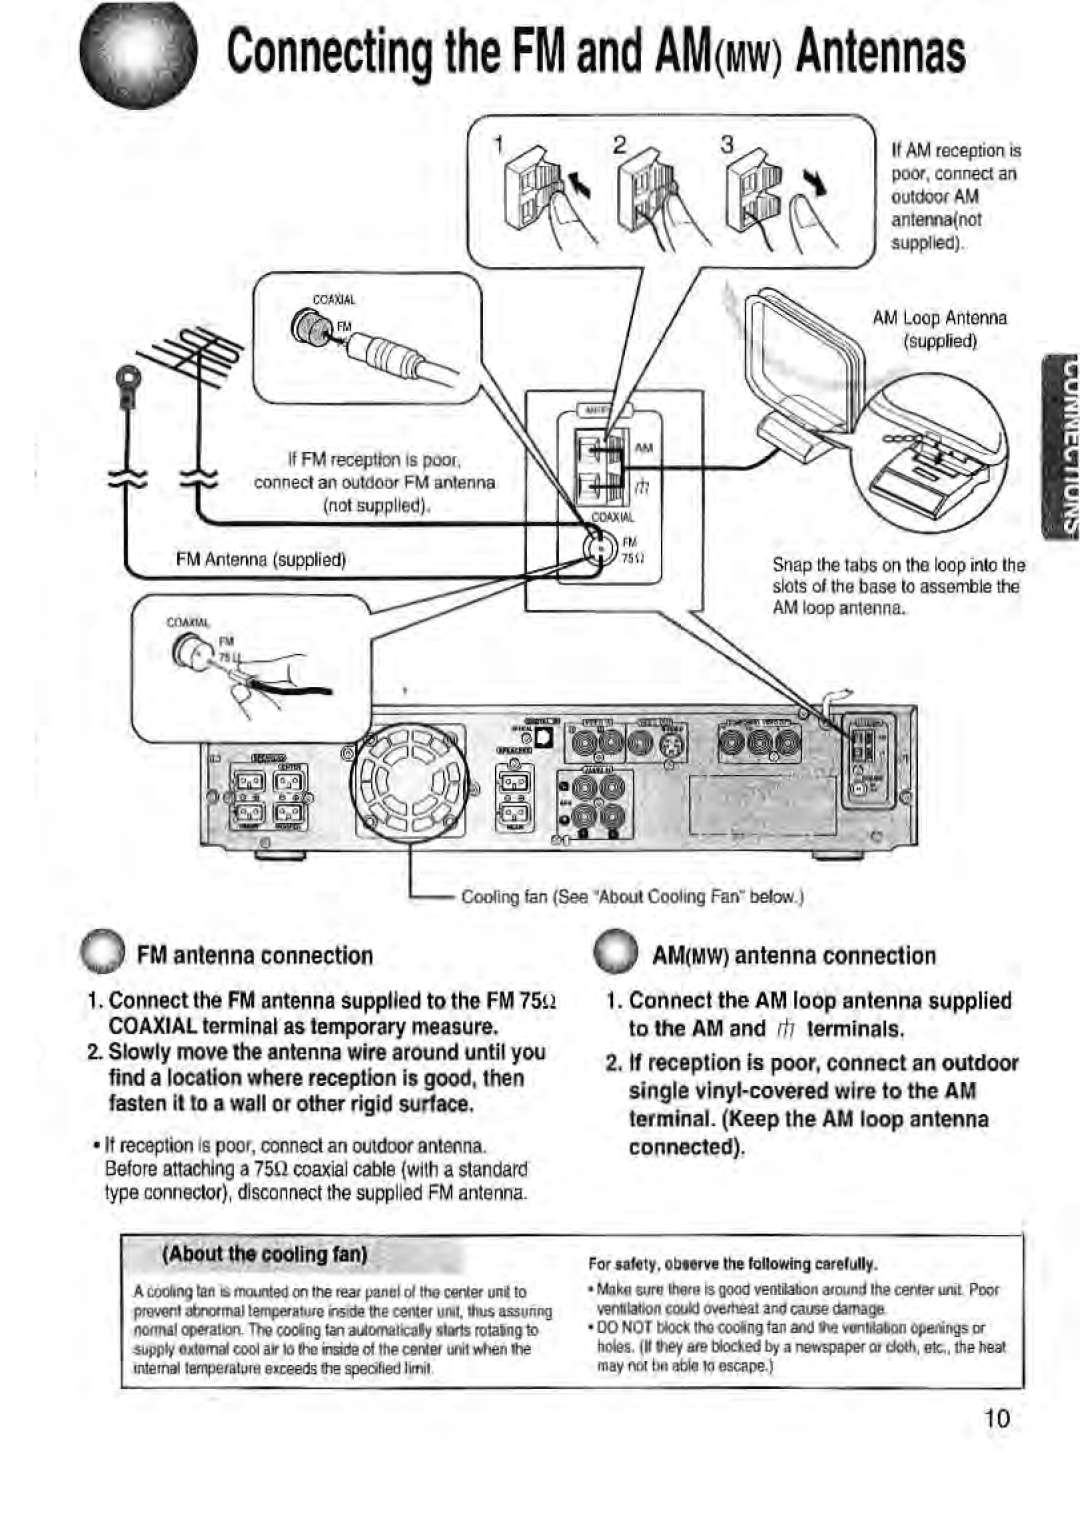 Toshiba SD-43HK owner manual Q FM antenna connection, Connecting the FM and AMMW Antennas, AMMw antenna connection 